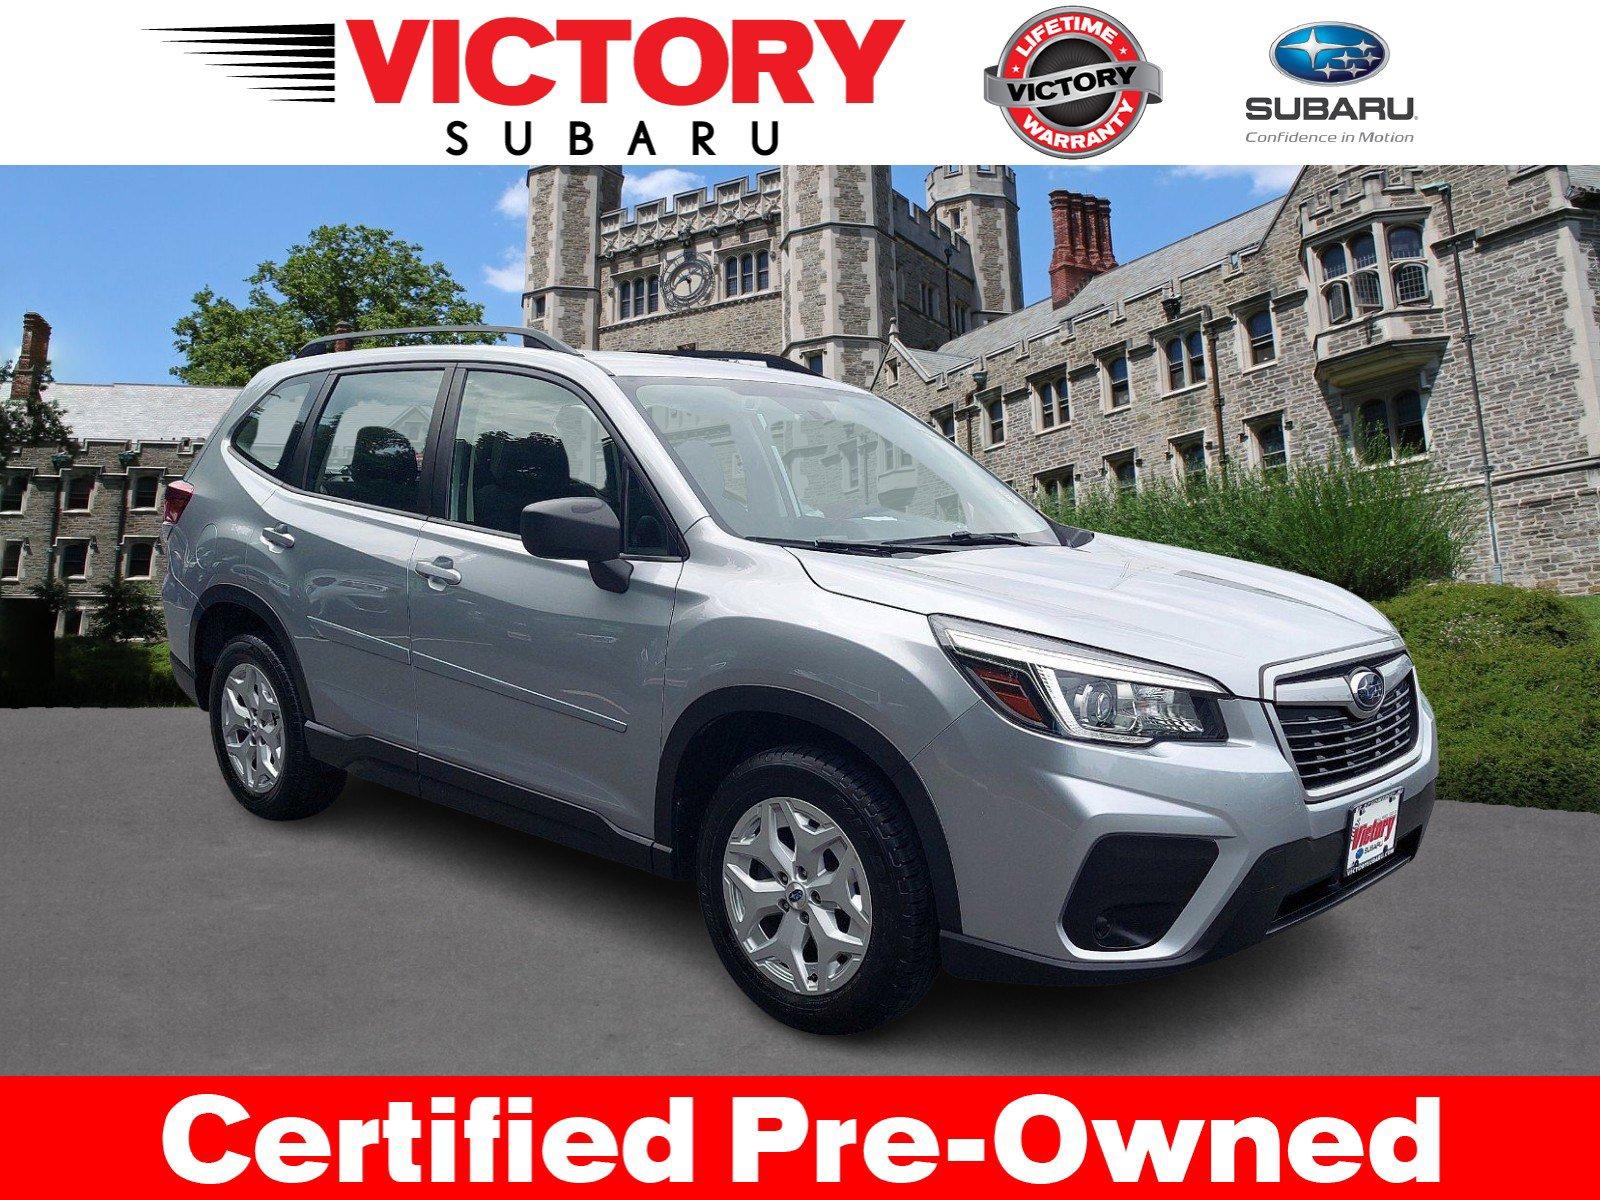 Used 2019 Subaru Forester for sale $27,999 at Victory Lotus in New Brunswick, NJ 08901 1